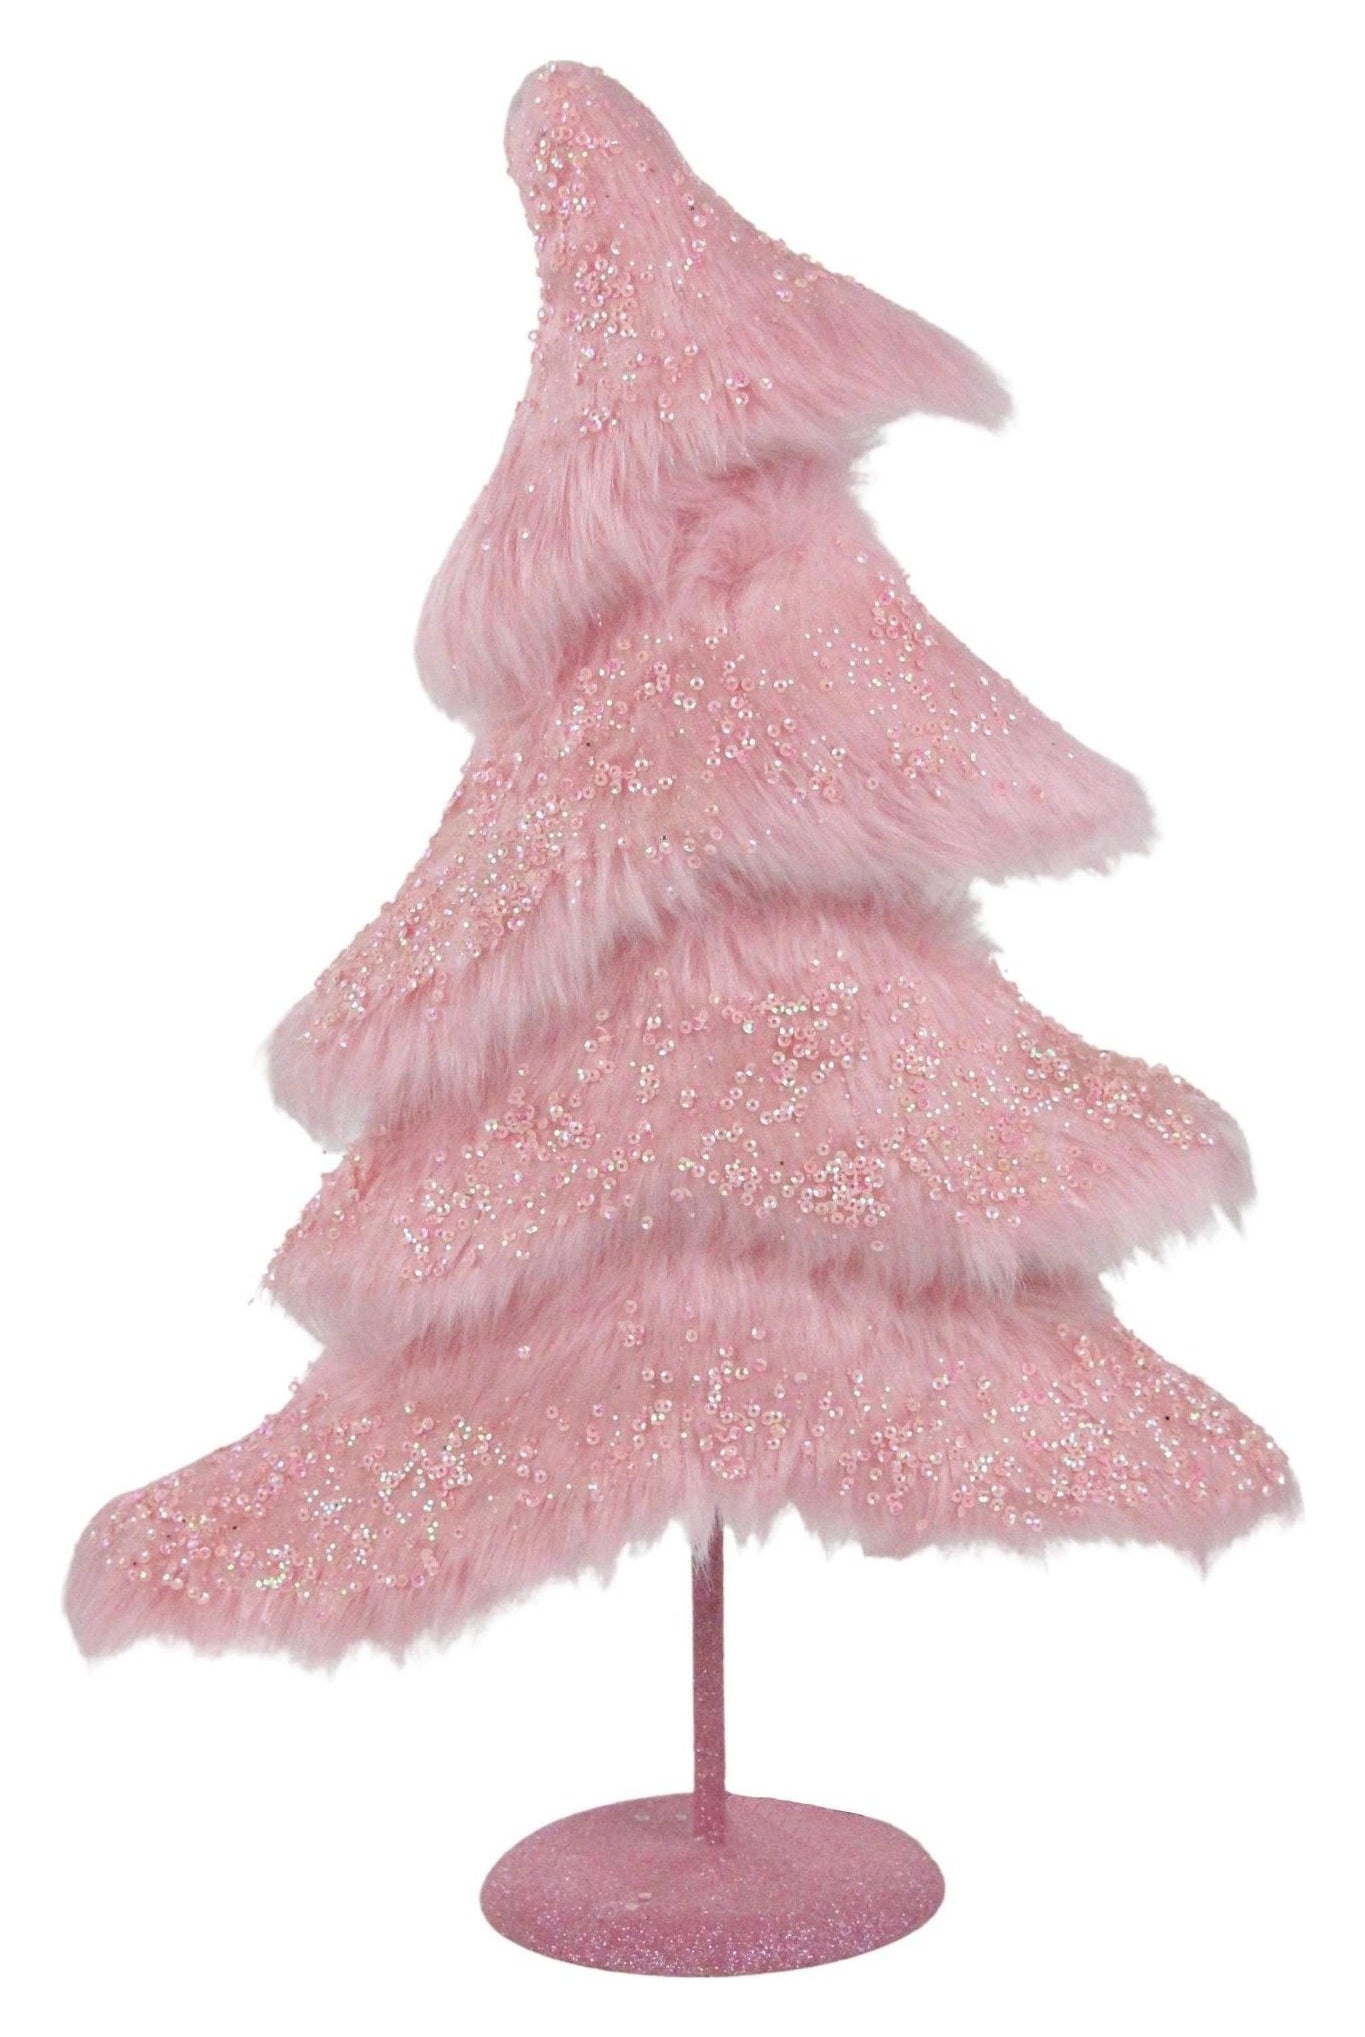 Shop For 18.5" Fabric Sequin Christmas Tree: Pink XT003415